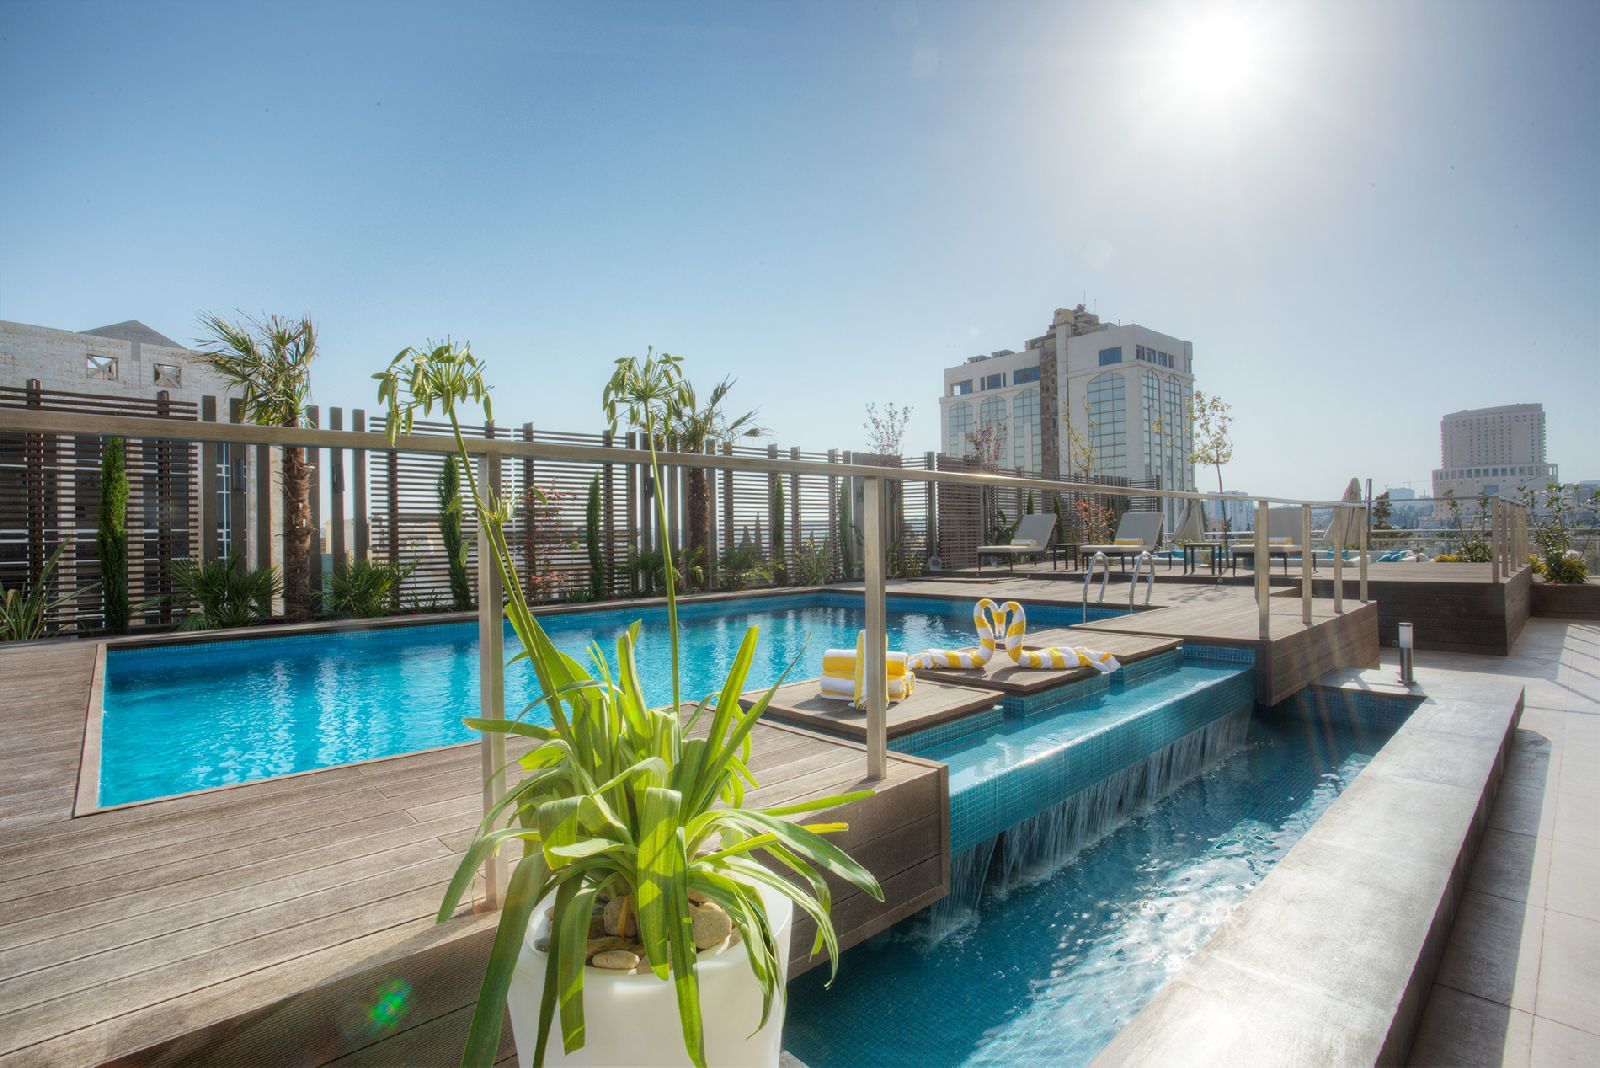 The rooftop pool at The House Boutique Suites Amman Jordan